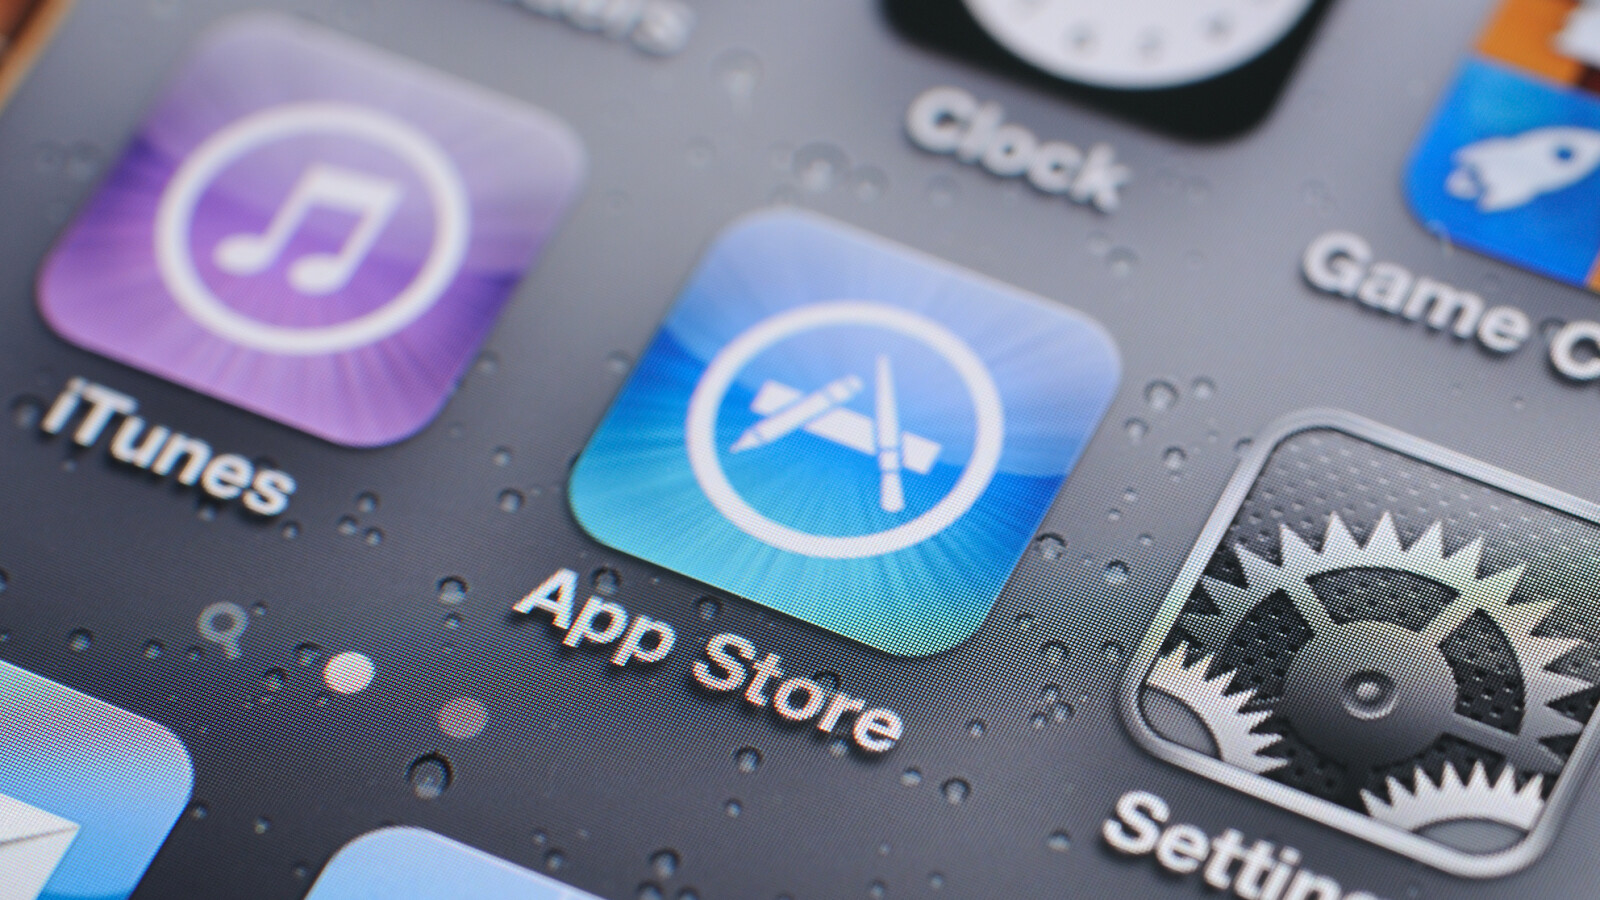 App Store and Apple Music appear to be down: Users reported issues